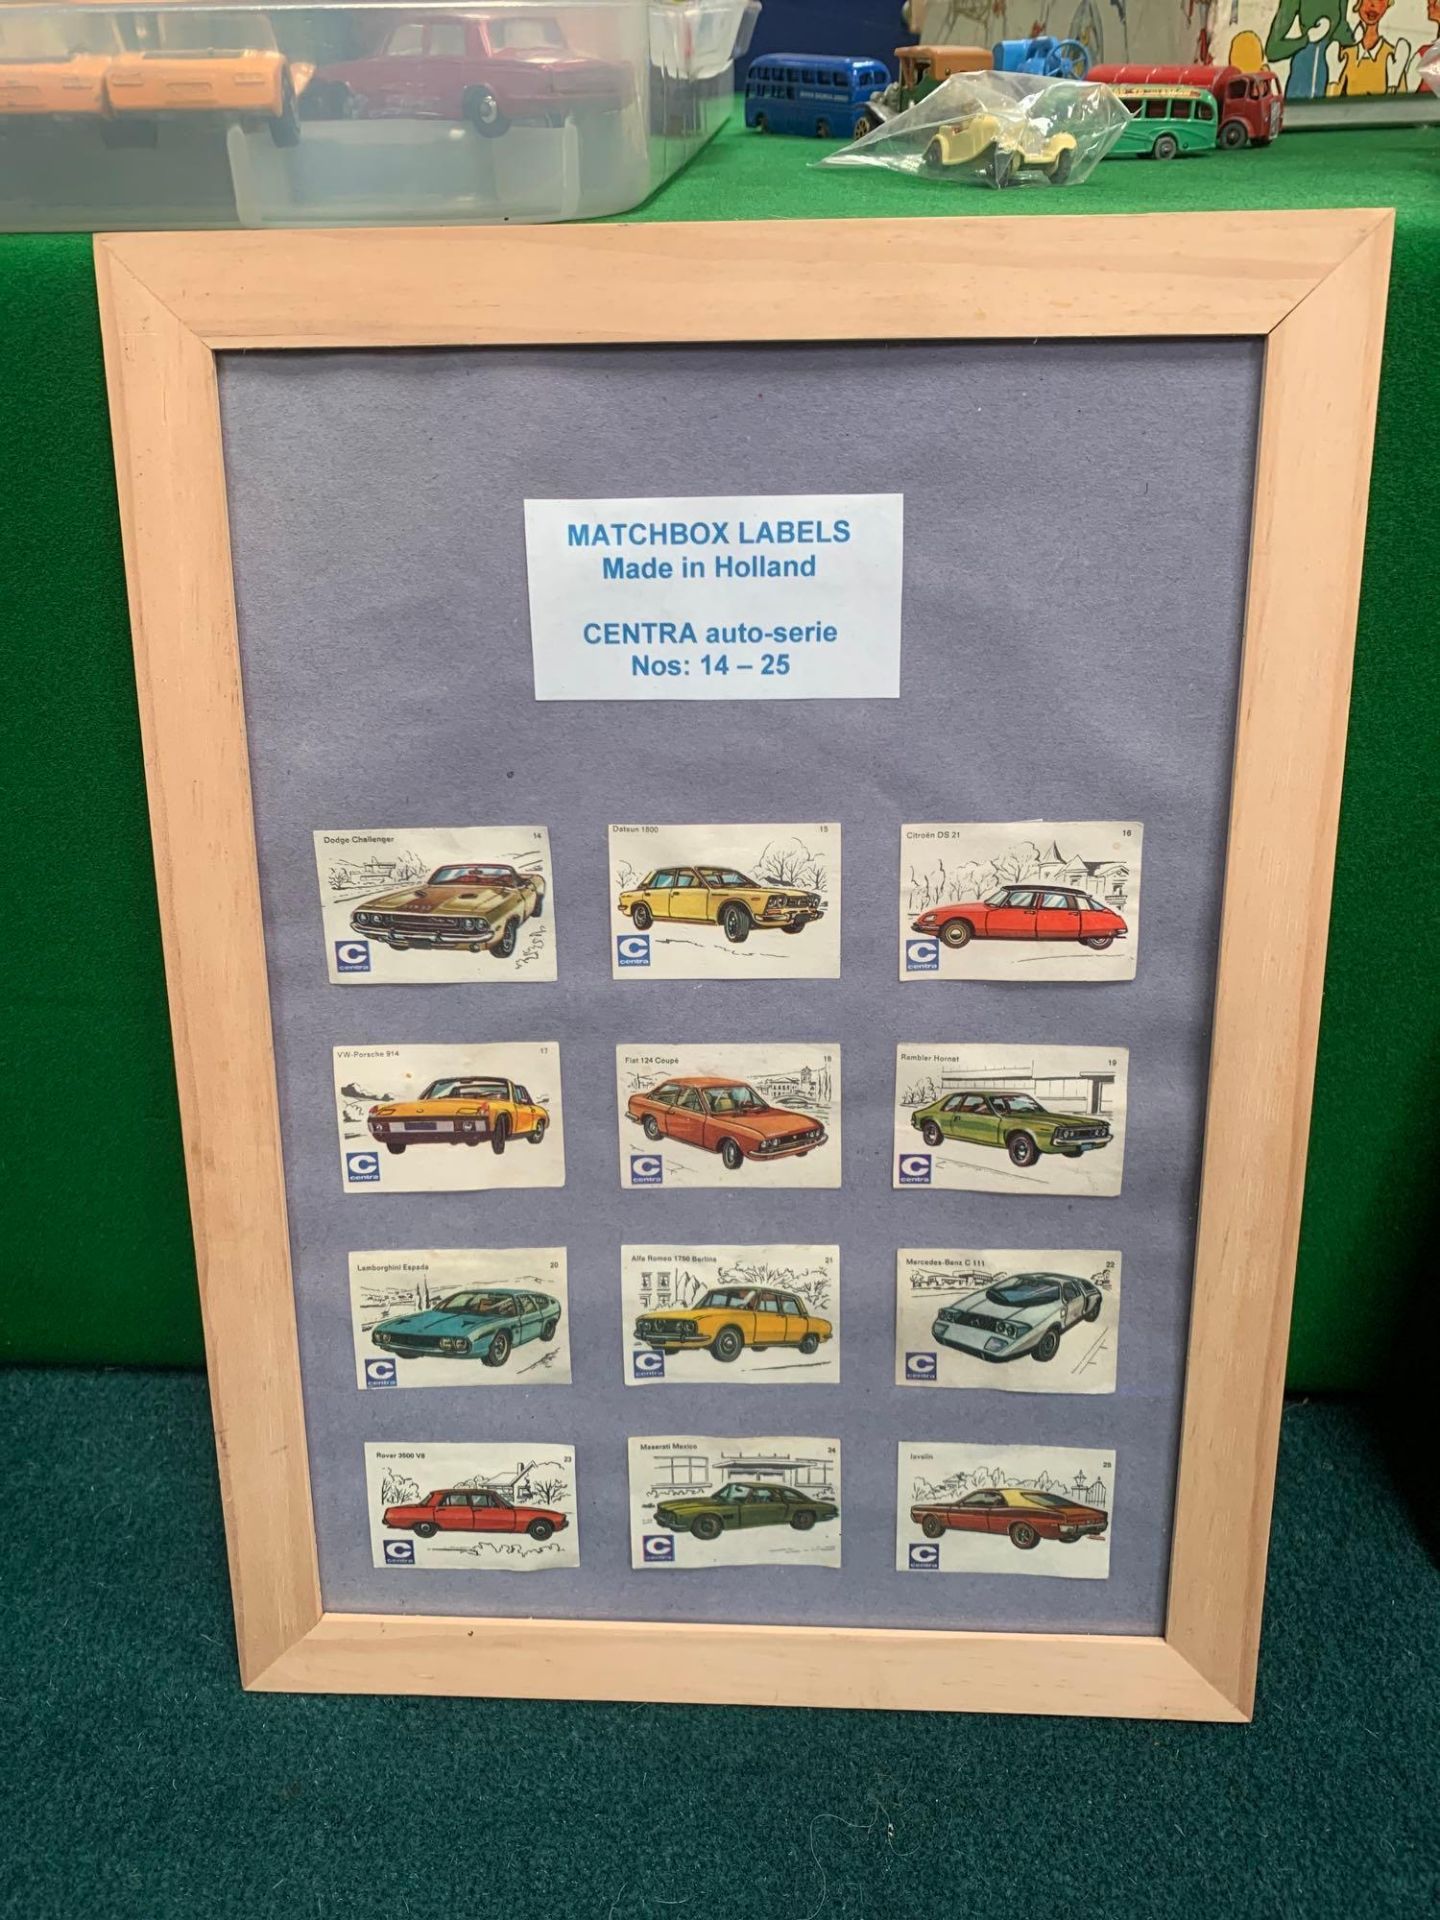 6 X Framed Matchbox Labels Made In Holland. - Centra Auto Series 1-13 Centra Auto Series 14 - 25 - Image 10 of 11